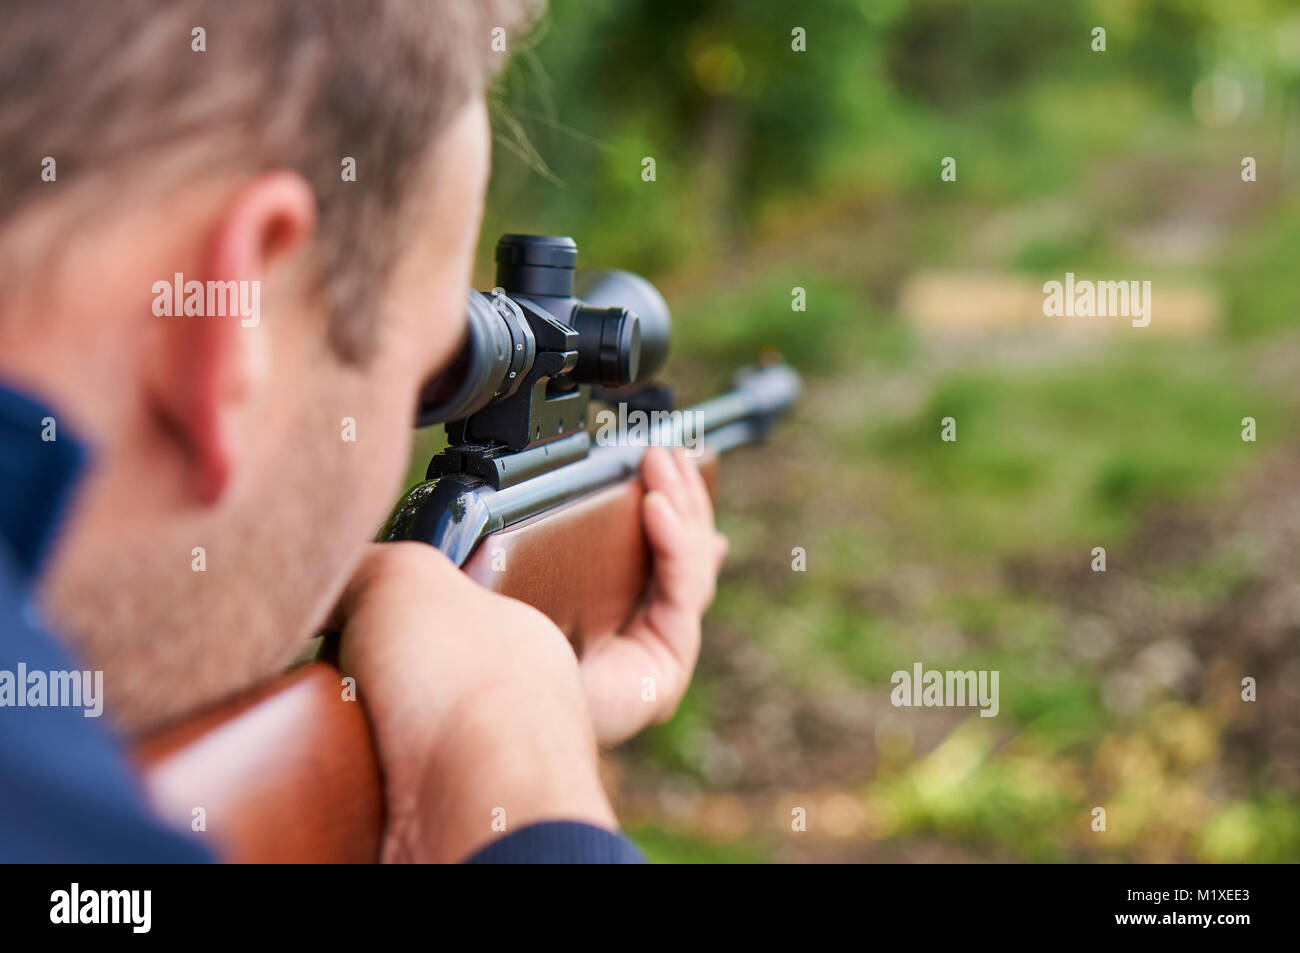 Man with air rifle. Stock Photo